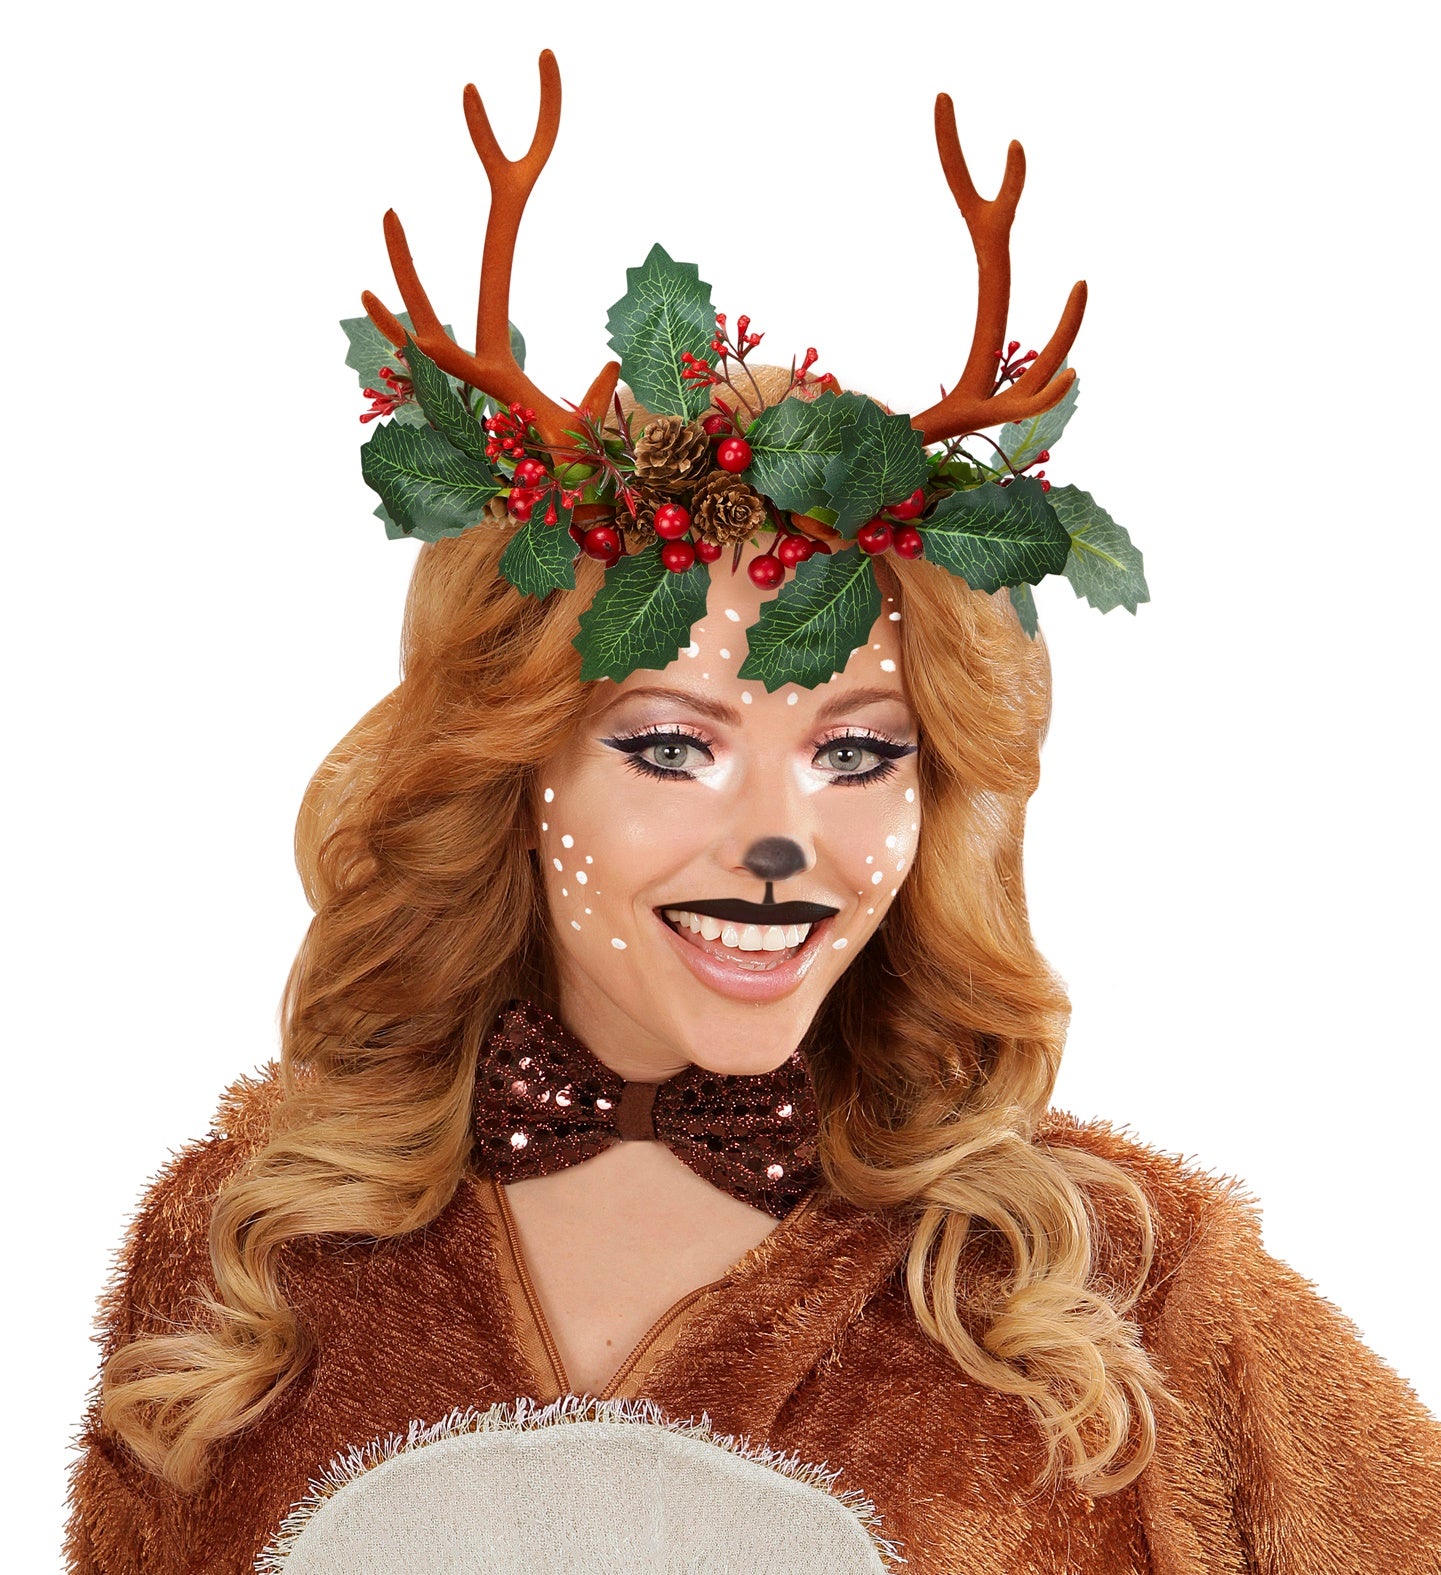 Reindeer Antlers with Holly and Pinecones costume accessory